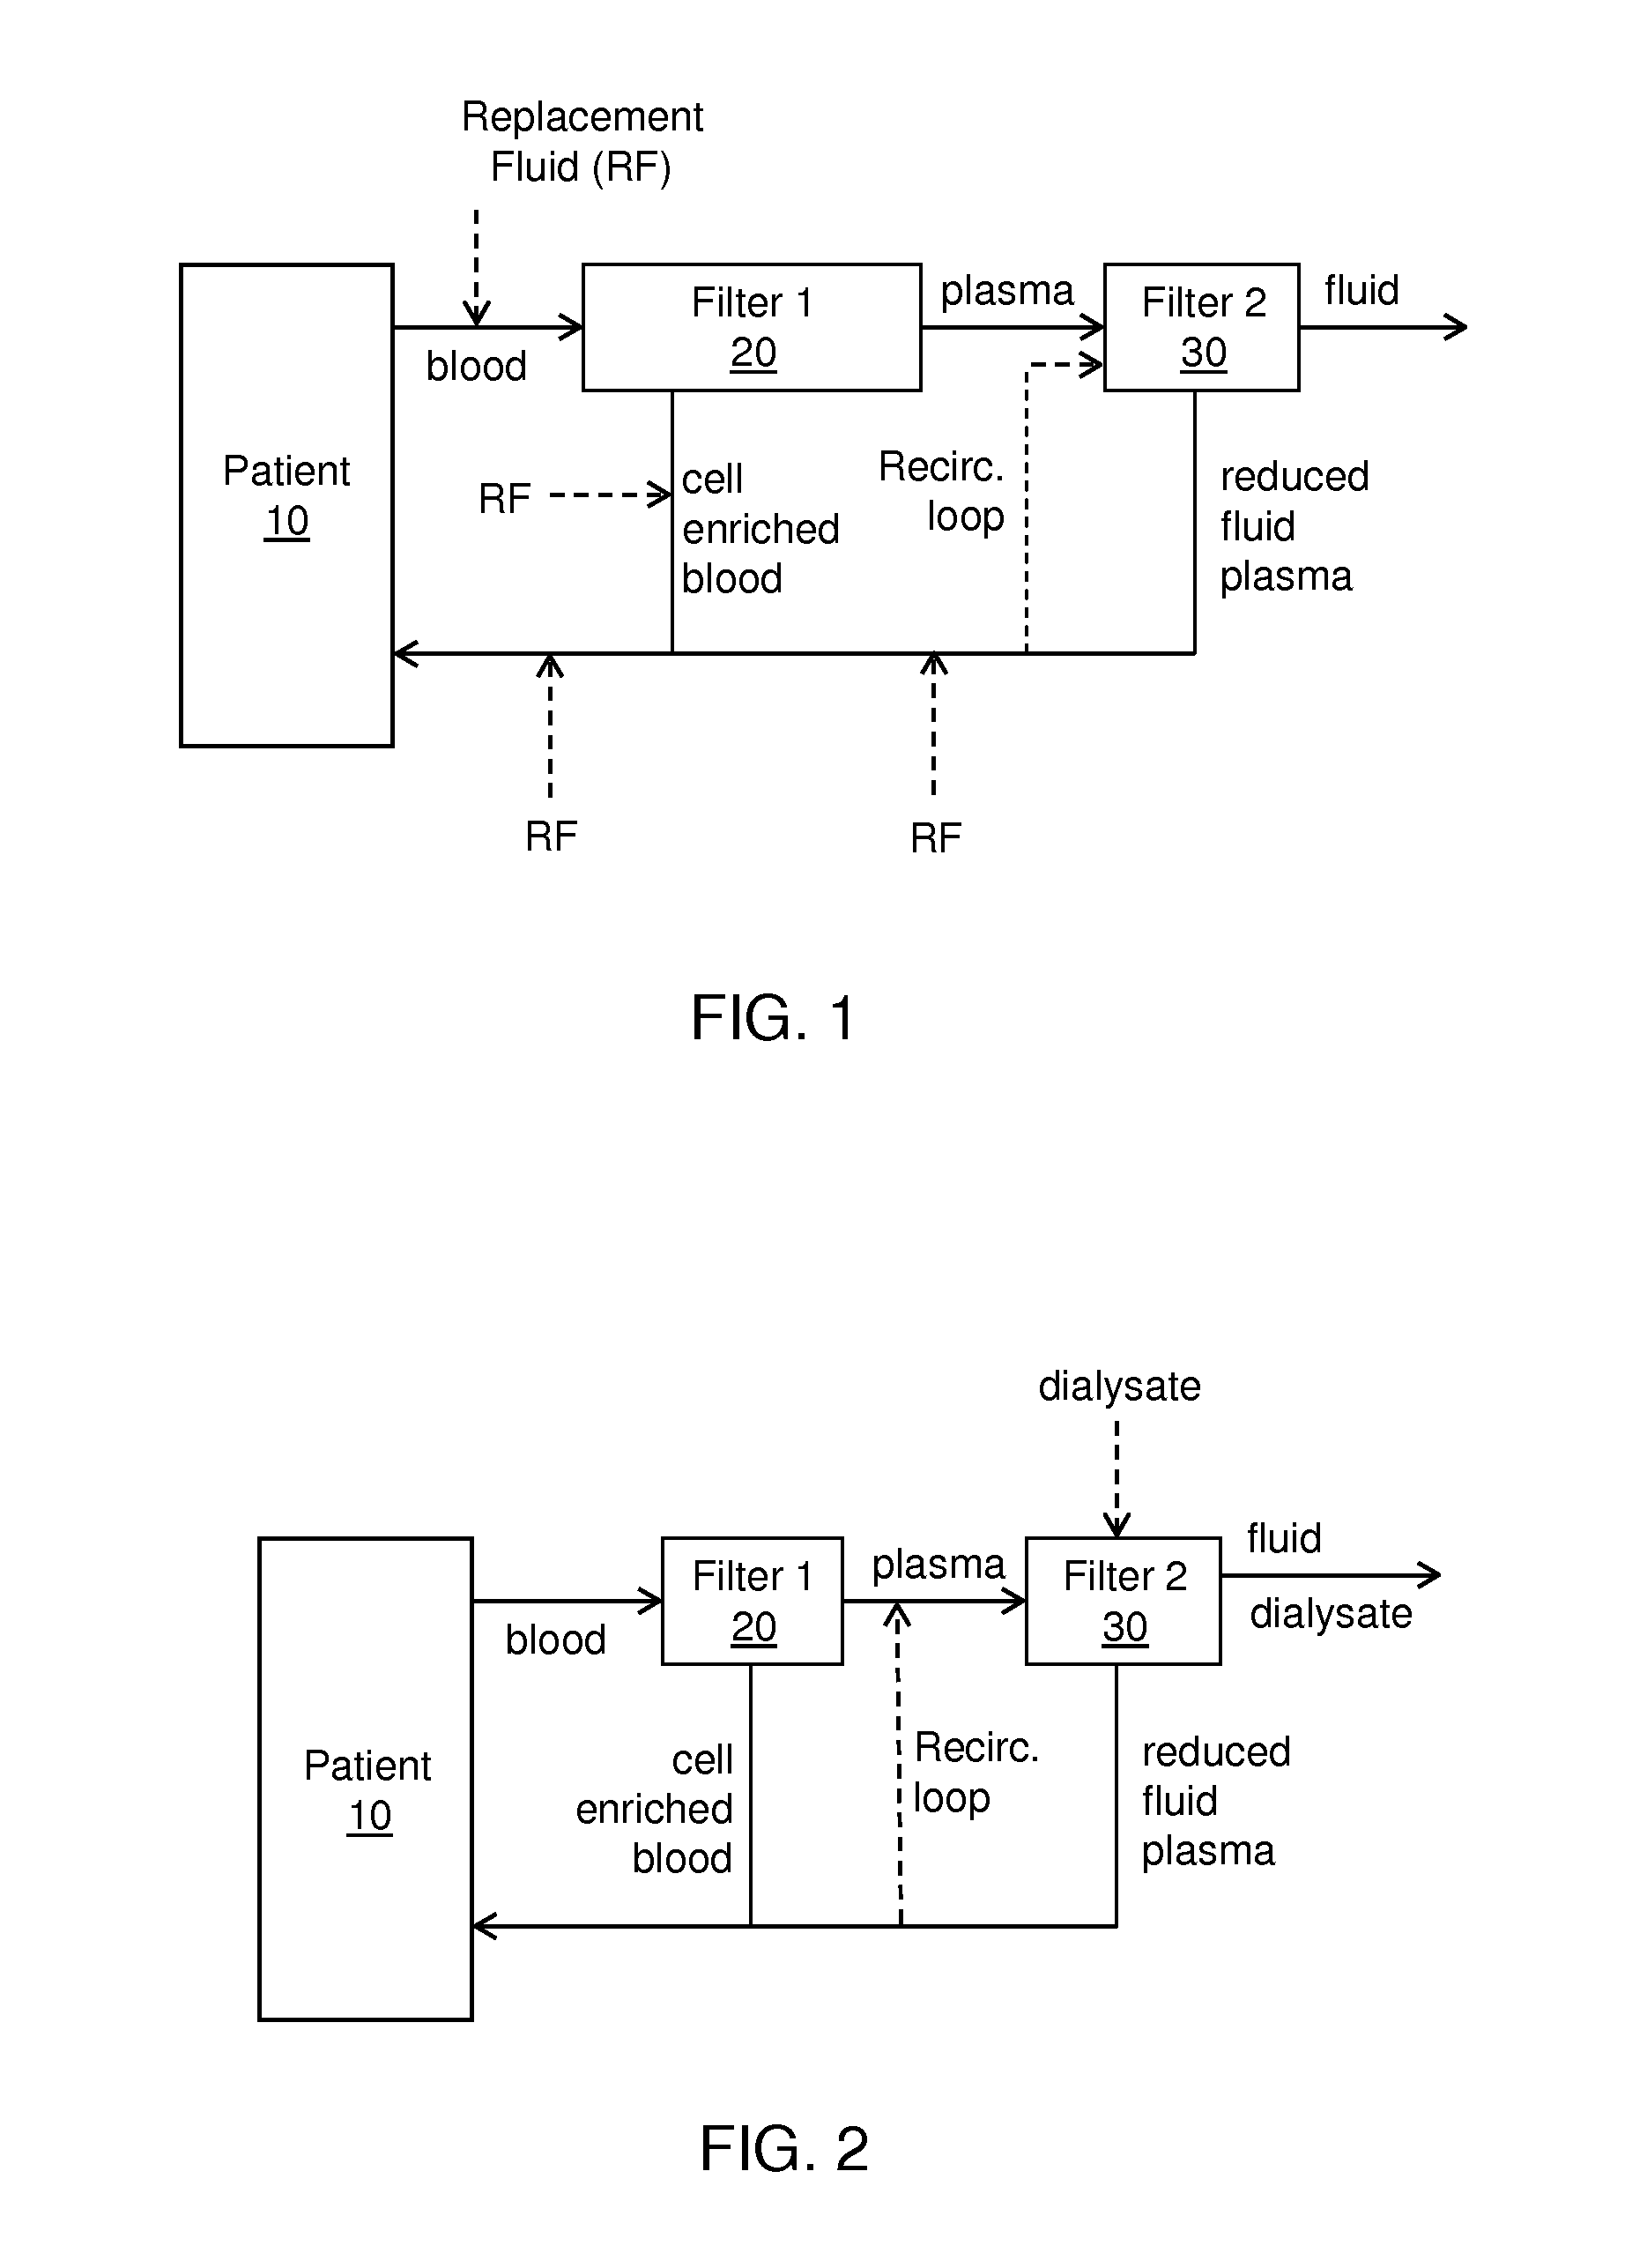 Multi-staged filtration system for blood fluid removal